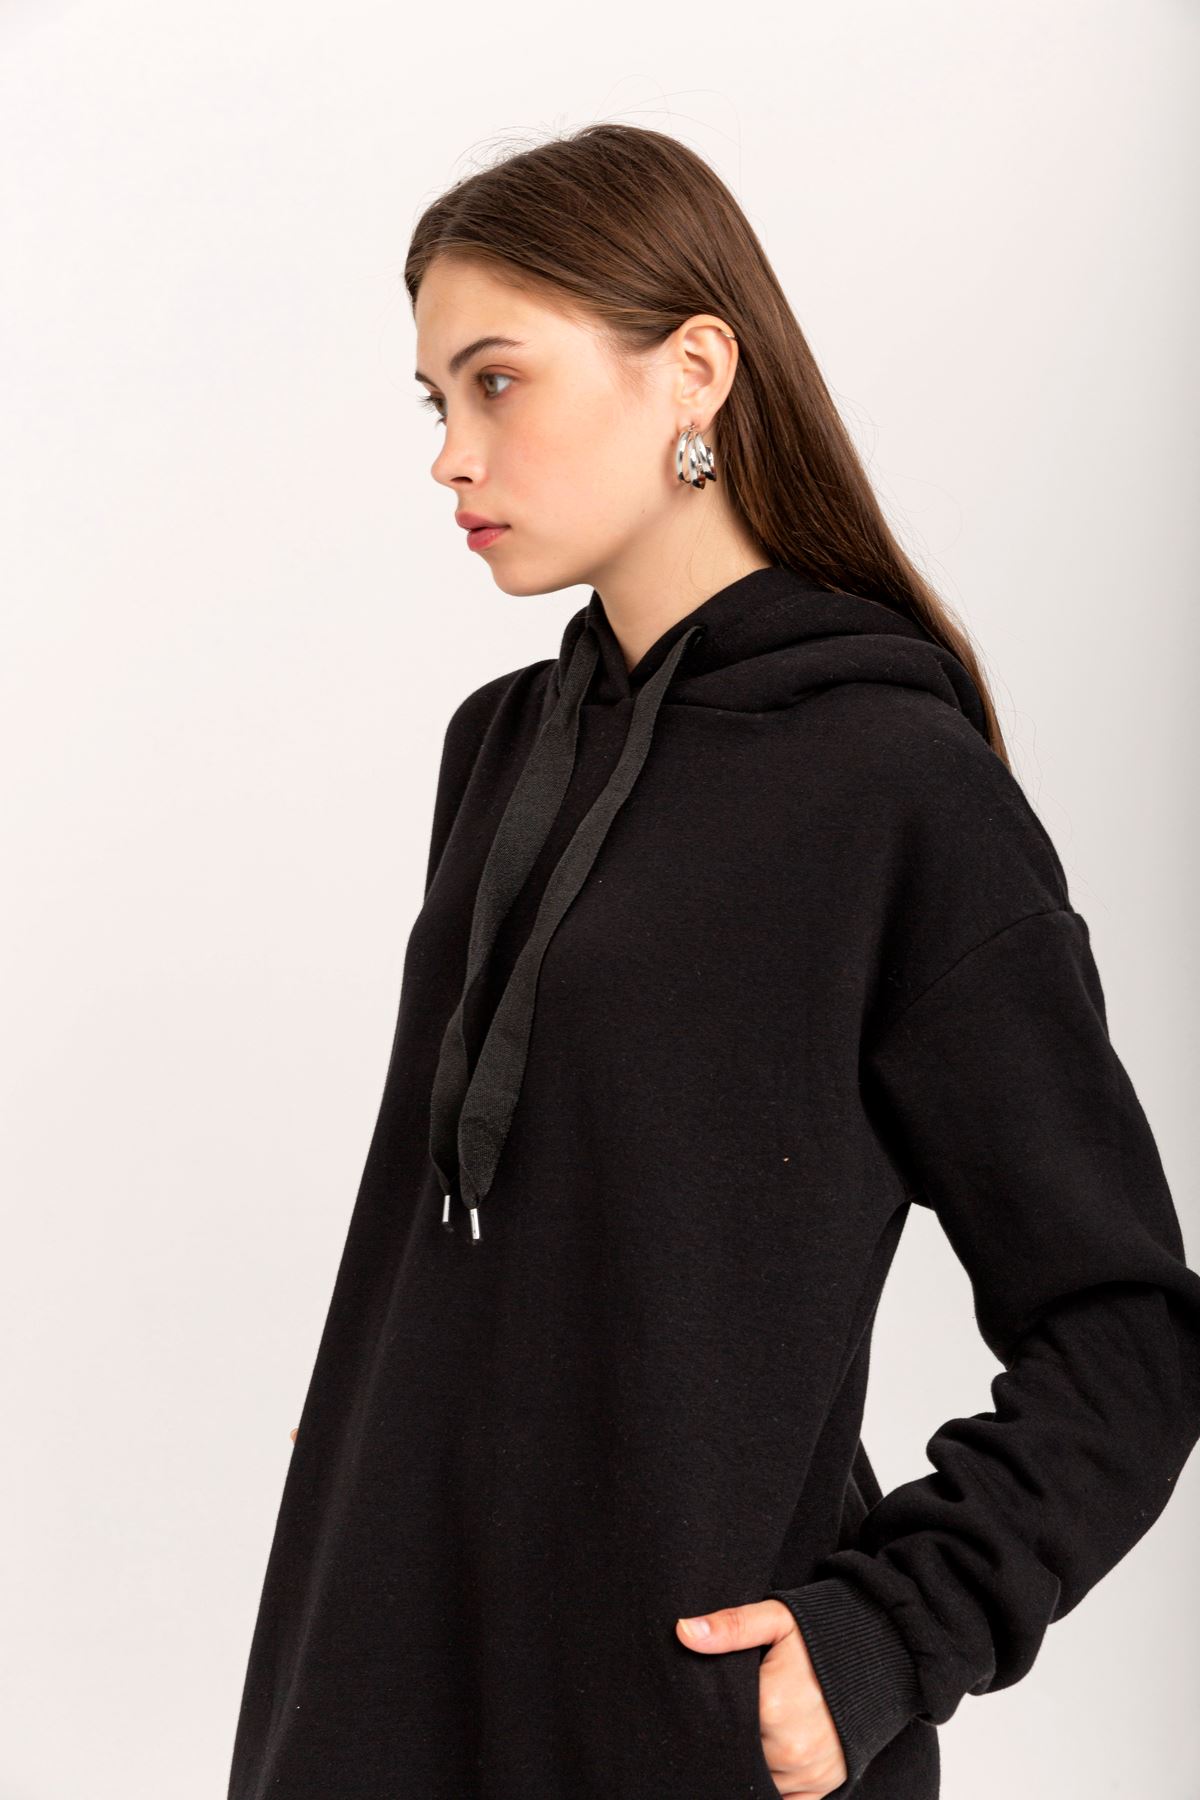 Third Knit With Wool İnside Fabric Long Sleeve Hooded Oversize Women Dress - Black